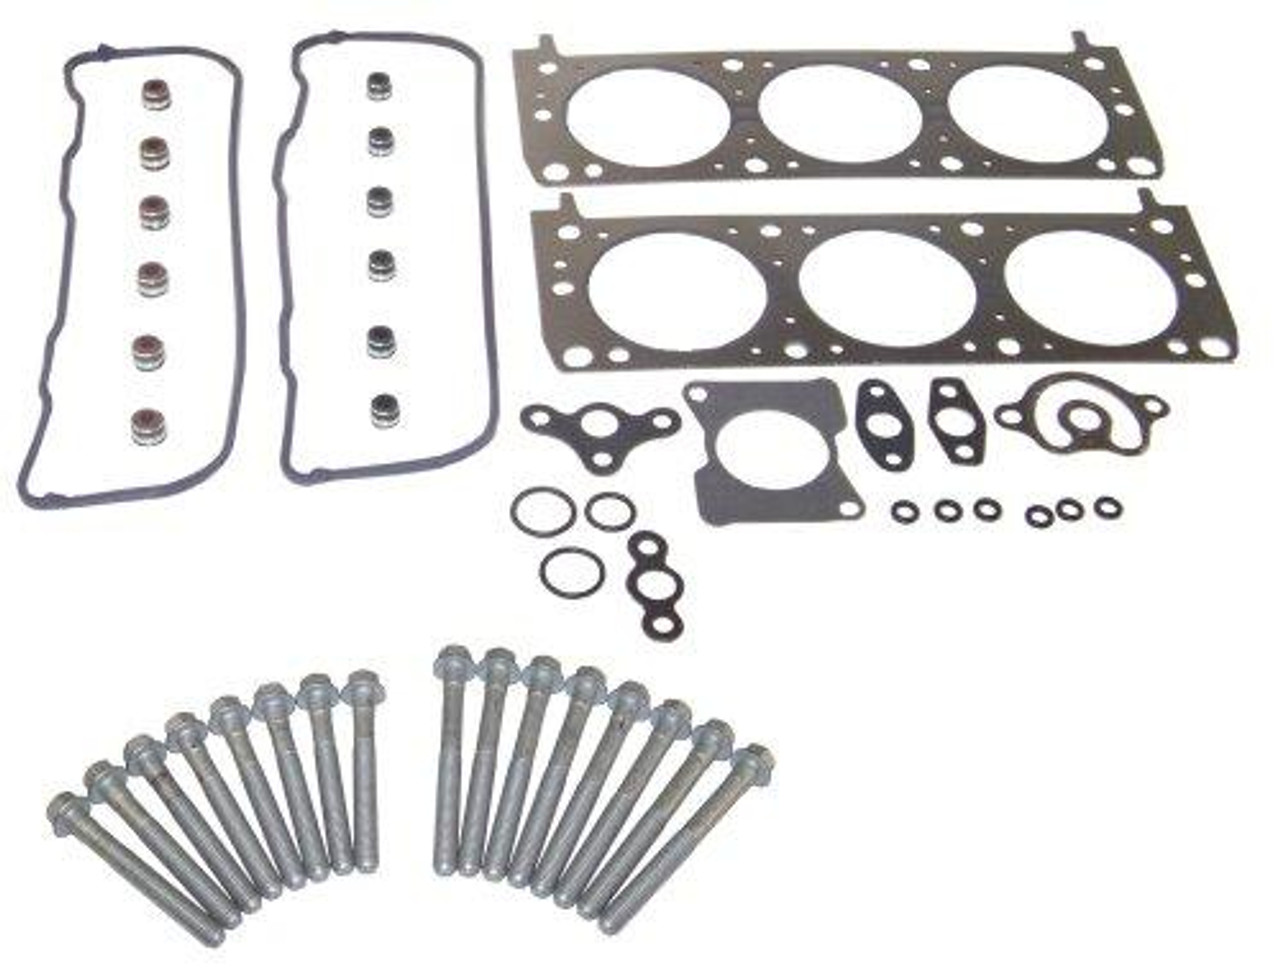 Head Gasket Set with Head Bolt Kit - 1989 Buick Century 2.8L Engine Parts # HGB31301ZE3